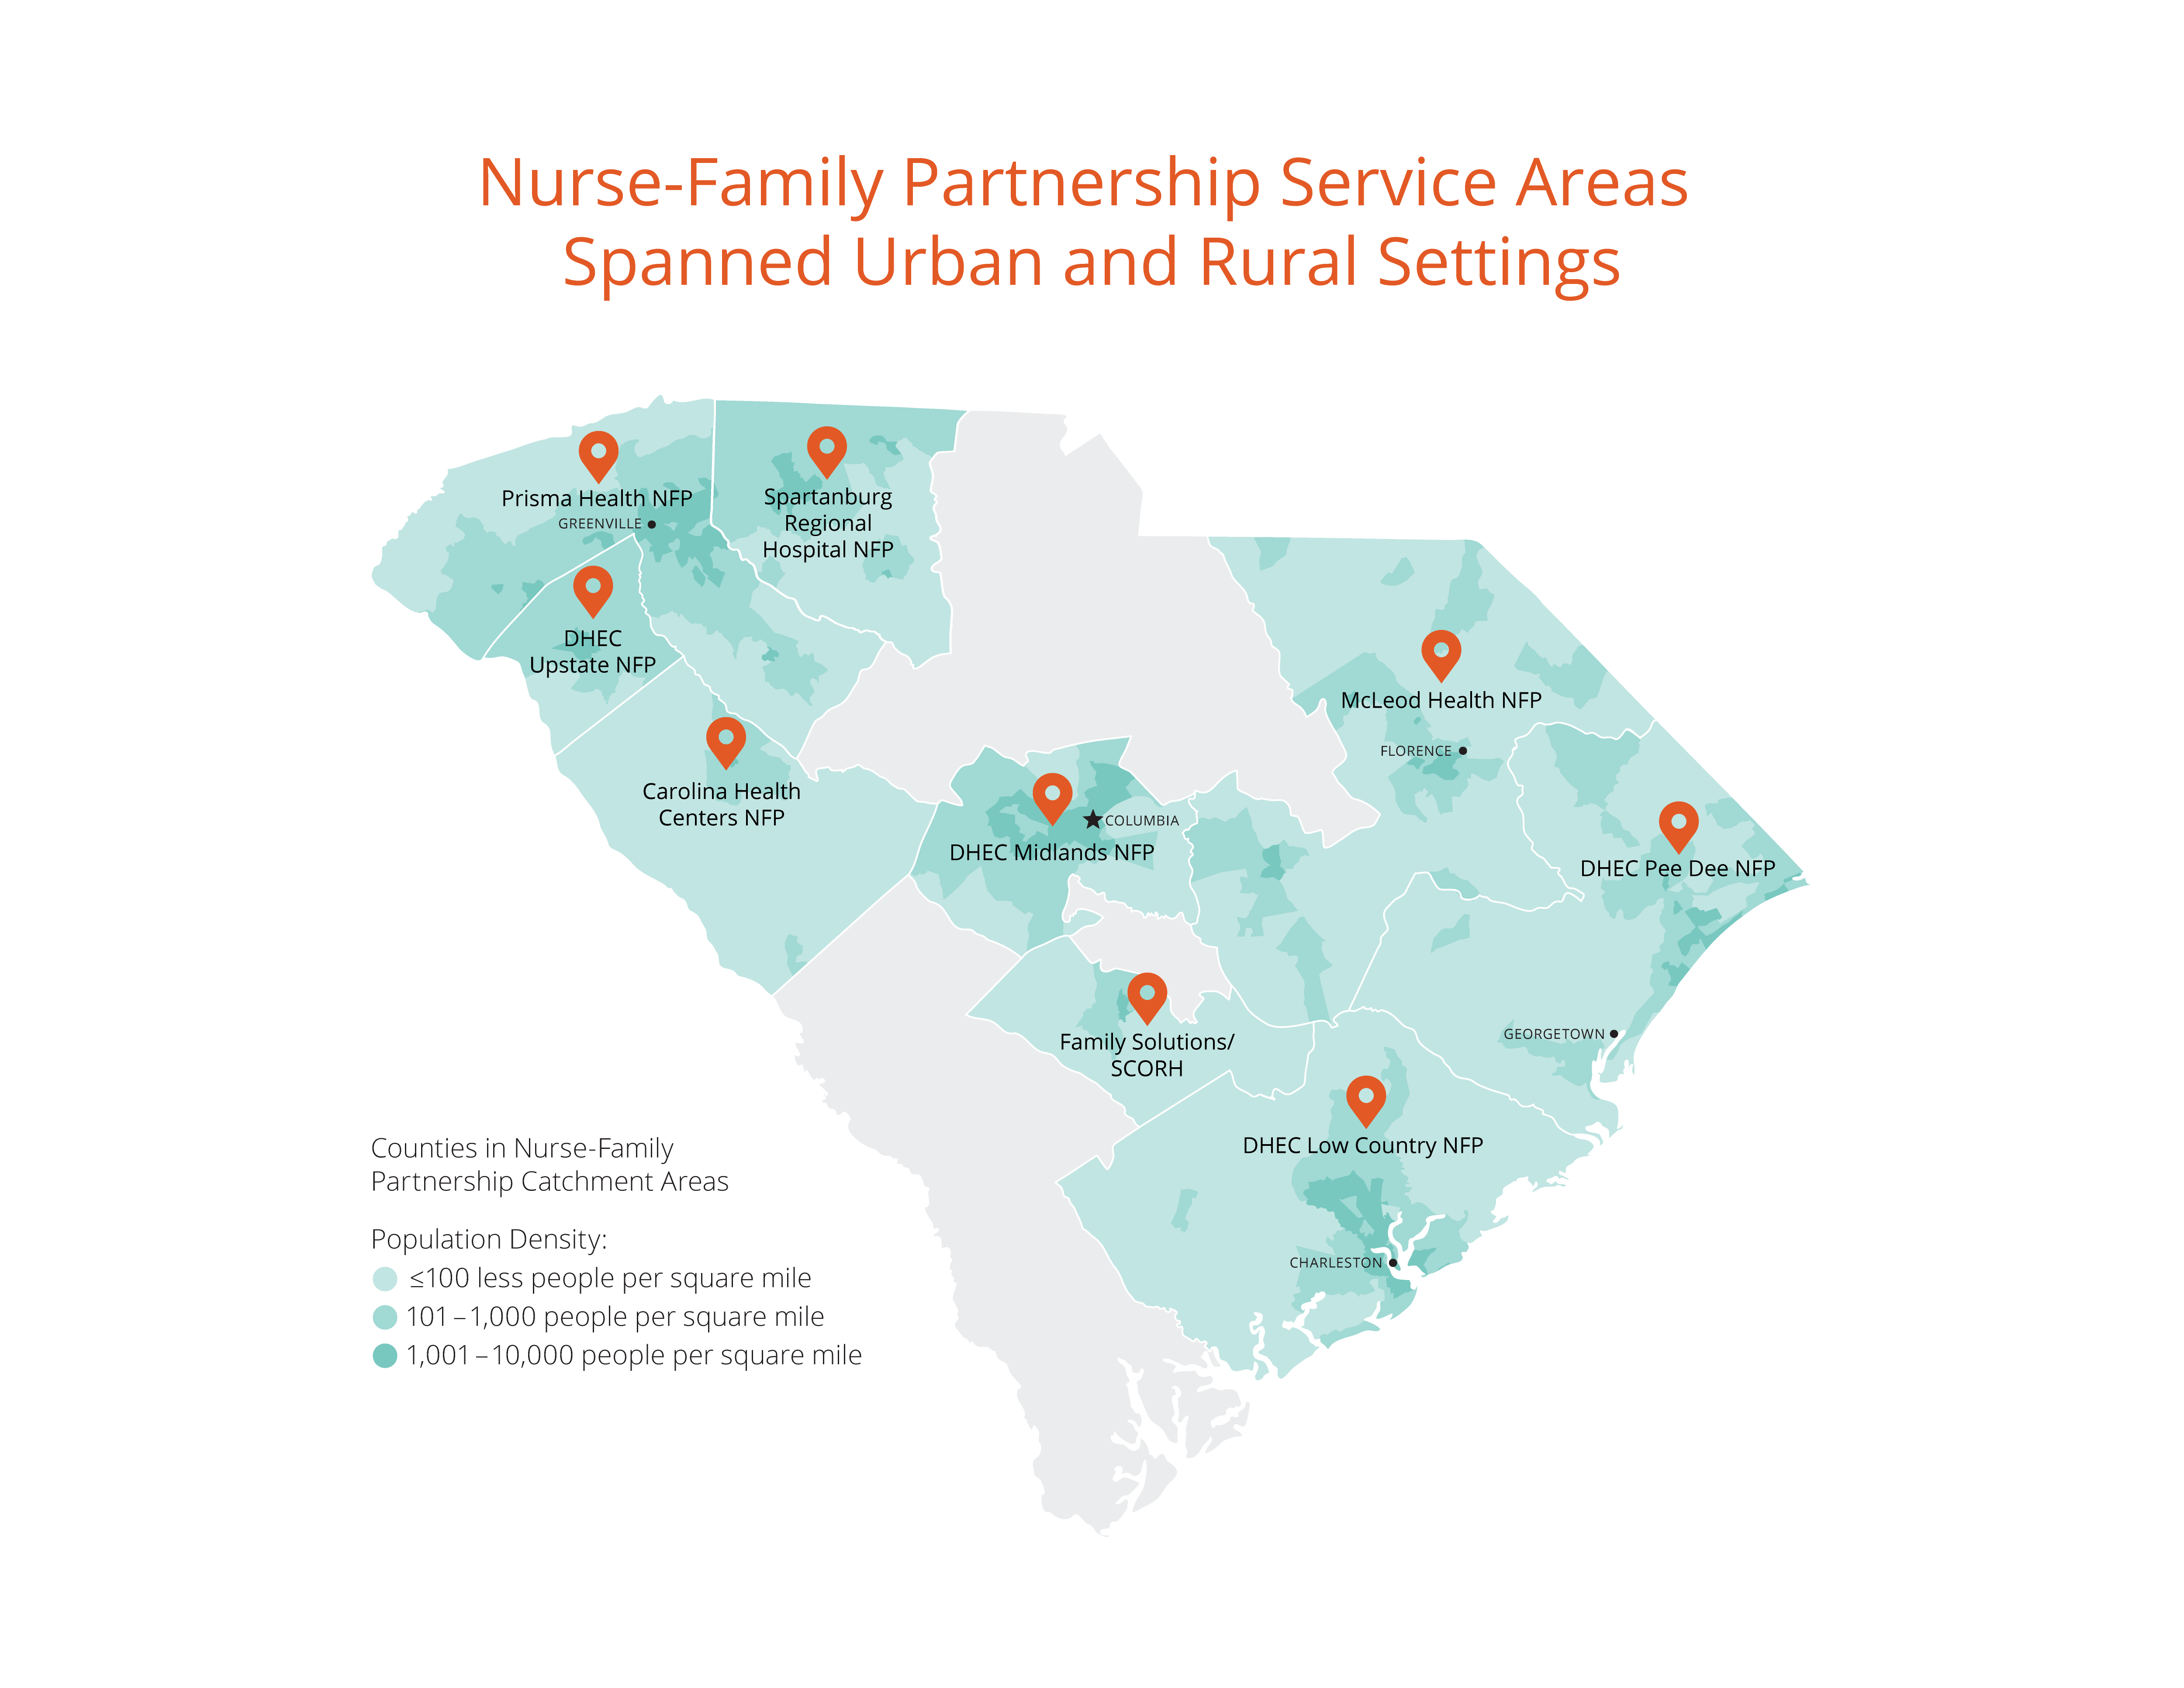 Nurse-Family Partnership Service Areas Spanned Urban and Rural Settings in South Carolina